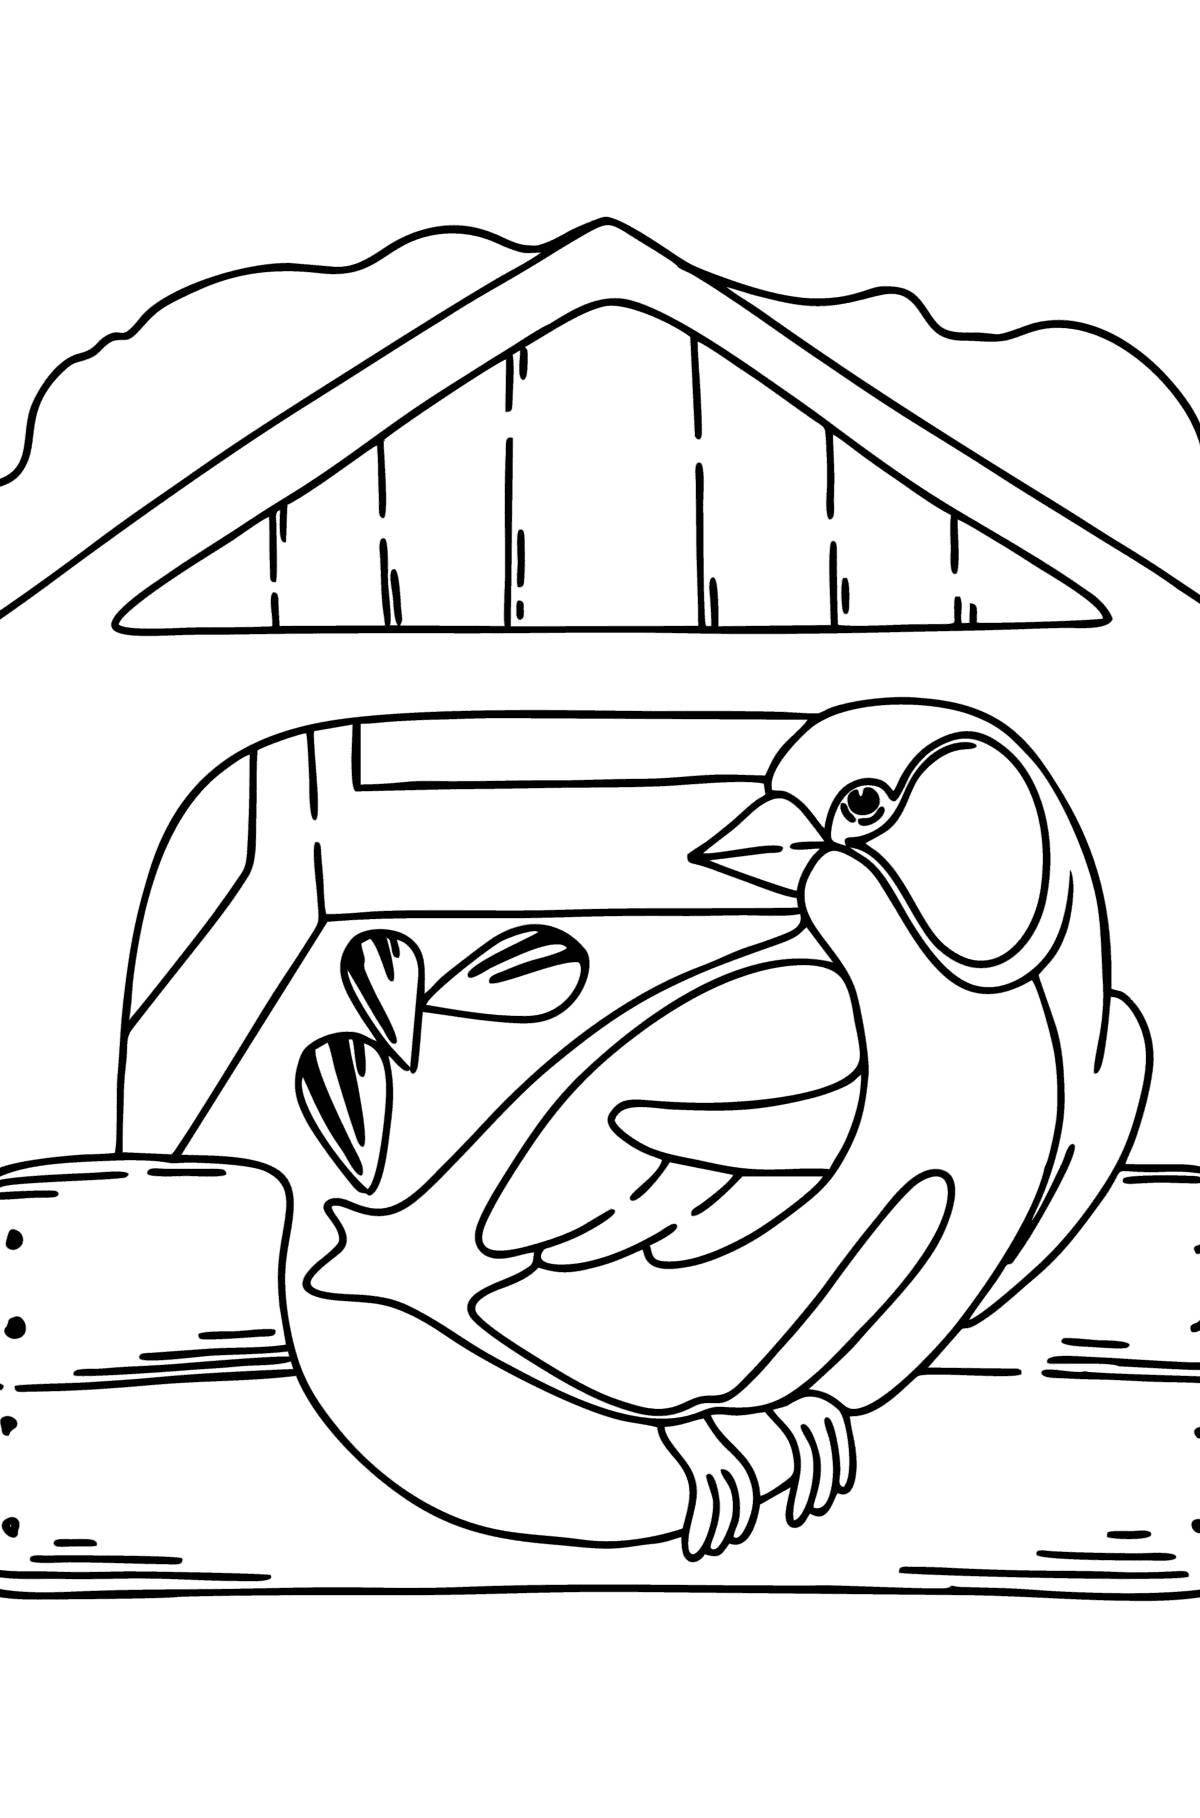 Coloring page great bird feeder